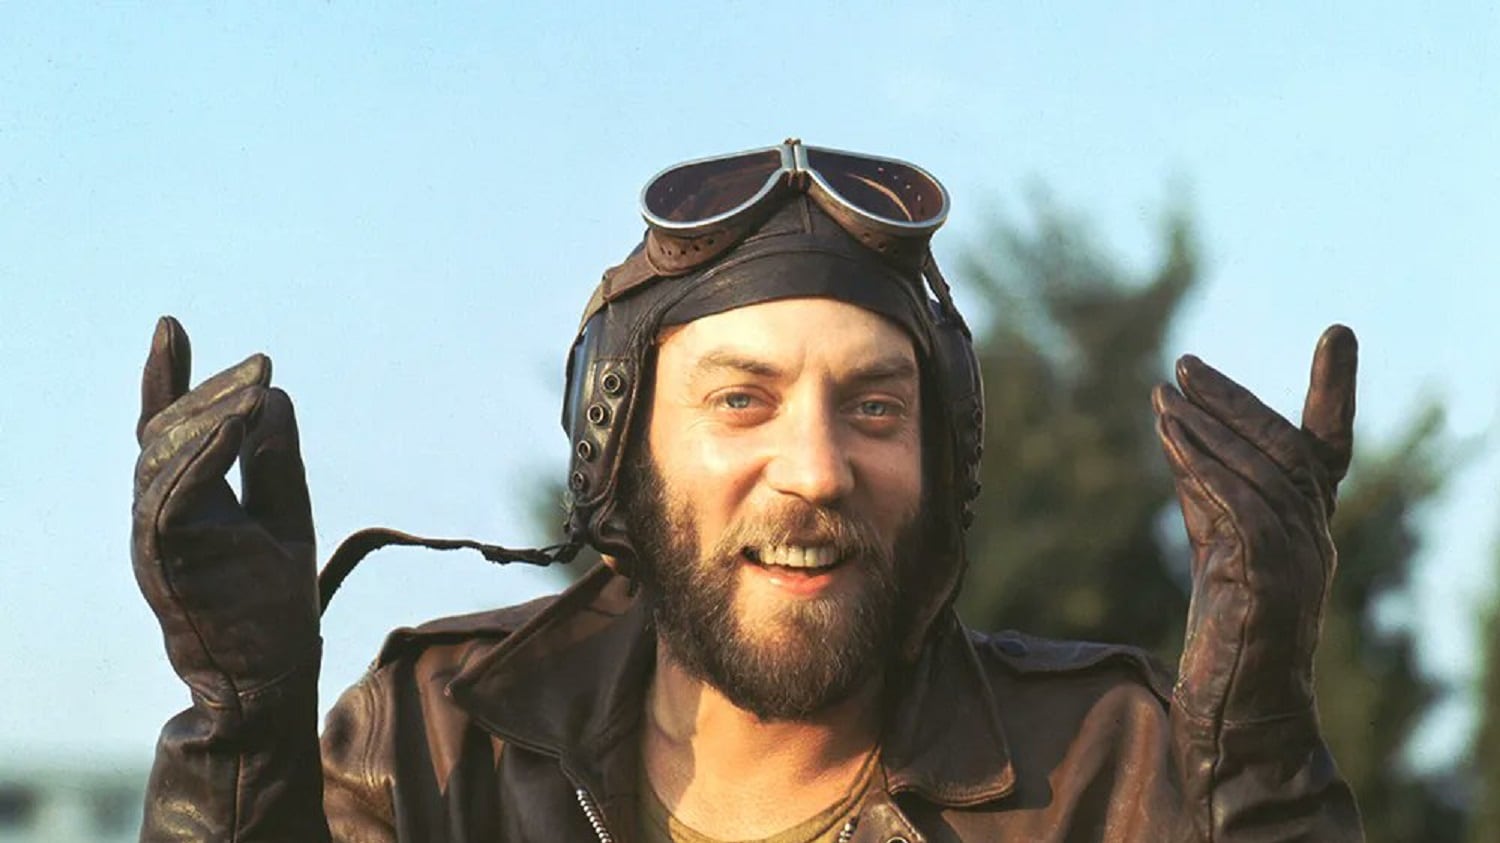 Donald Sutherland as 'Oddball' in Kelly's Heroes